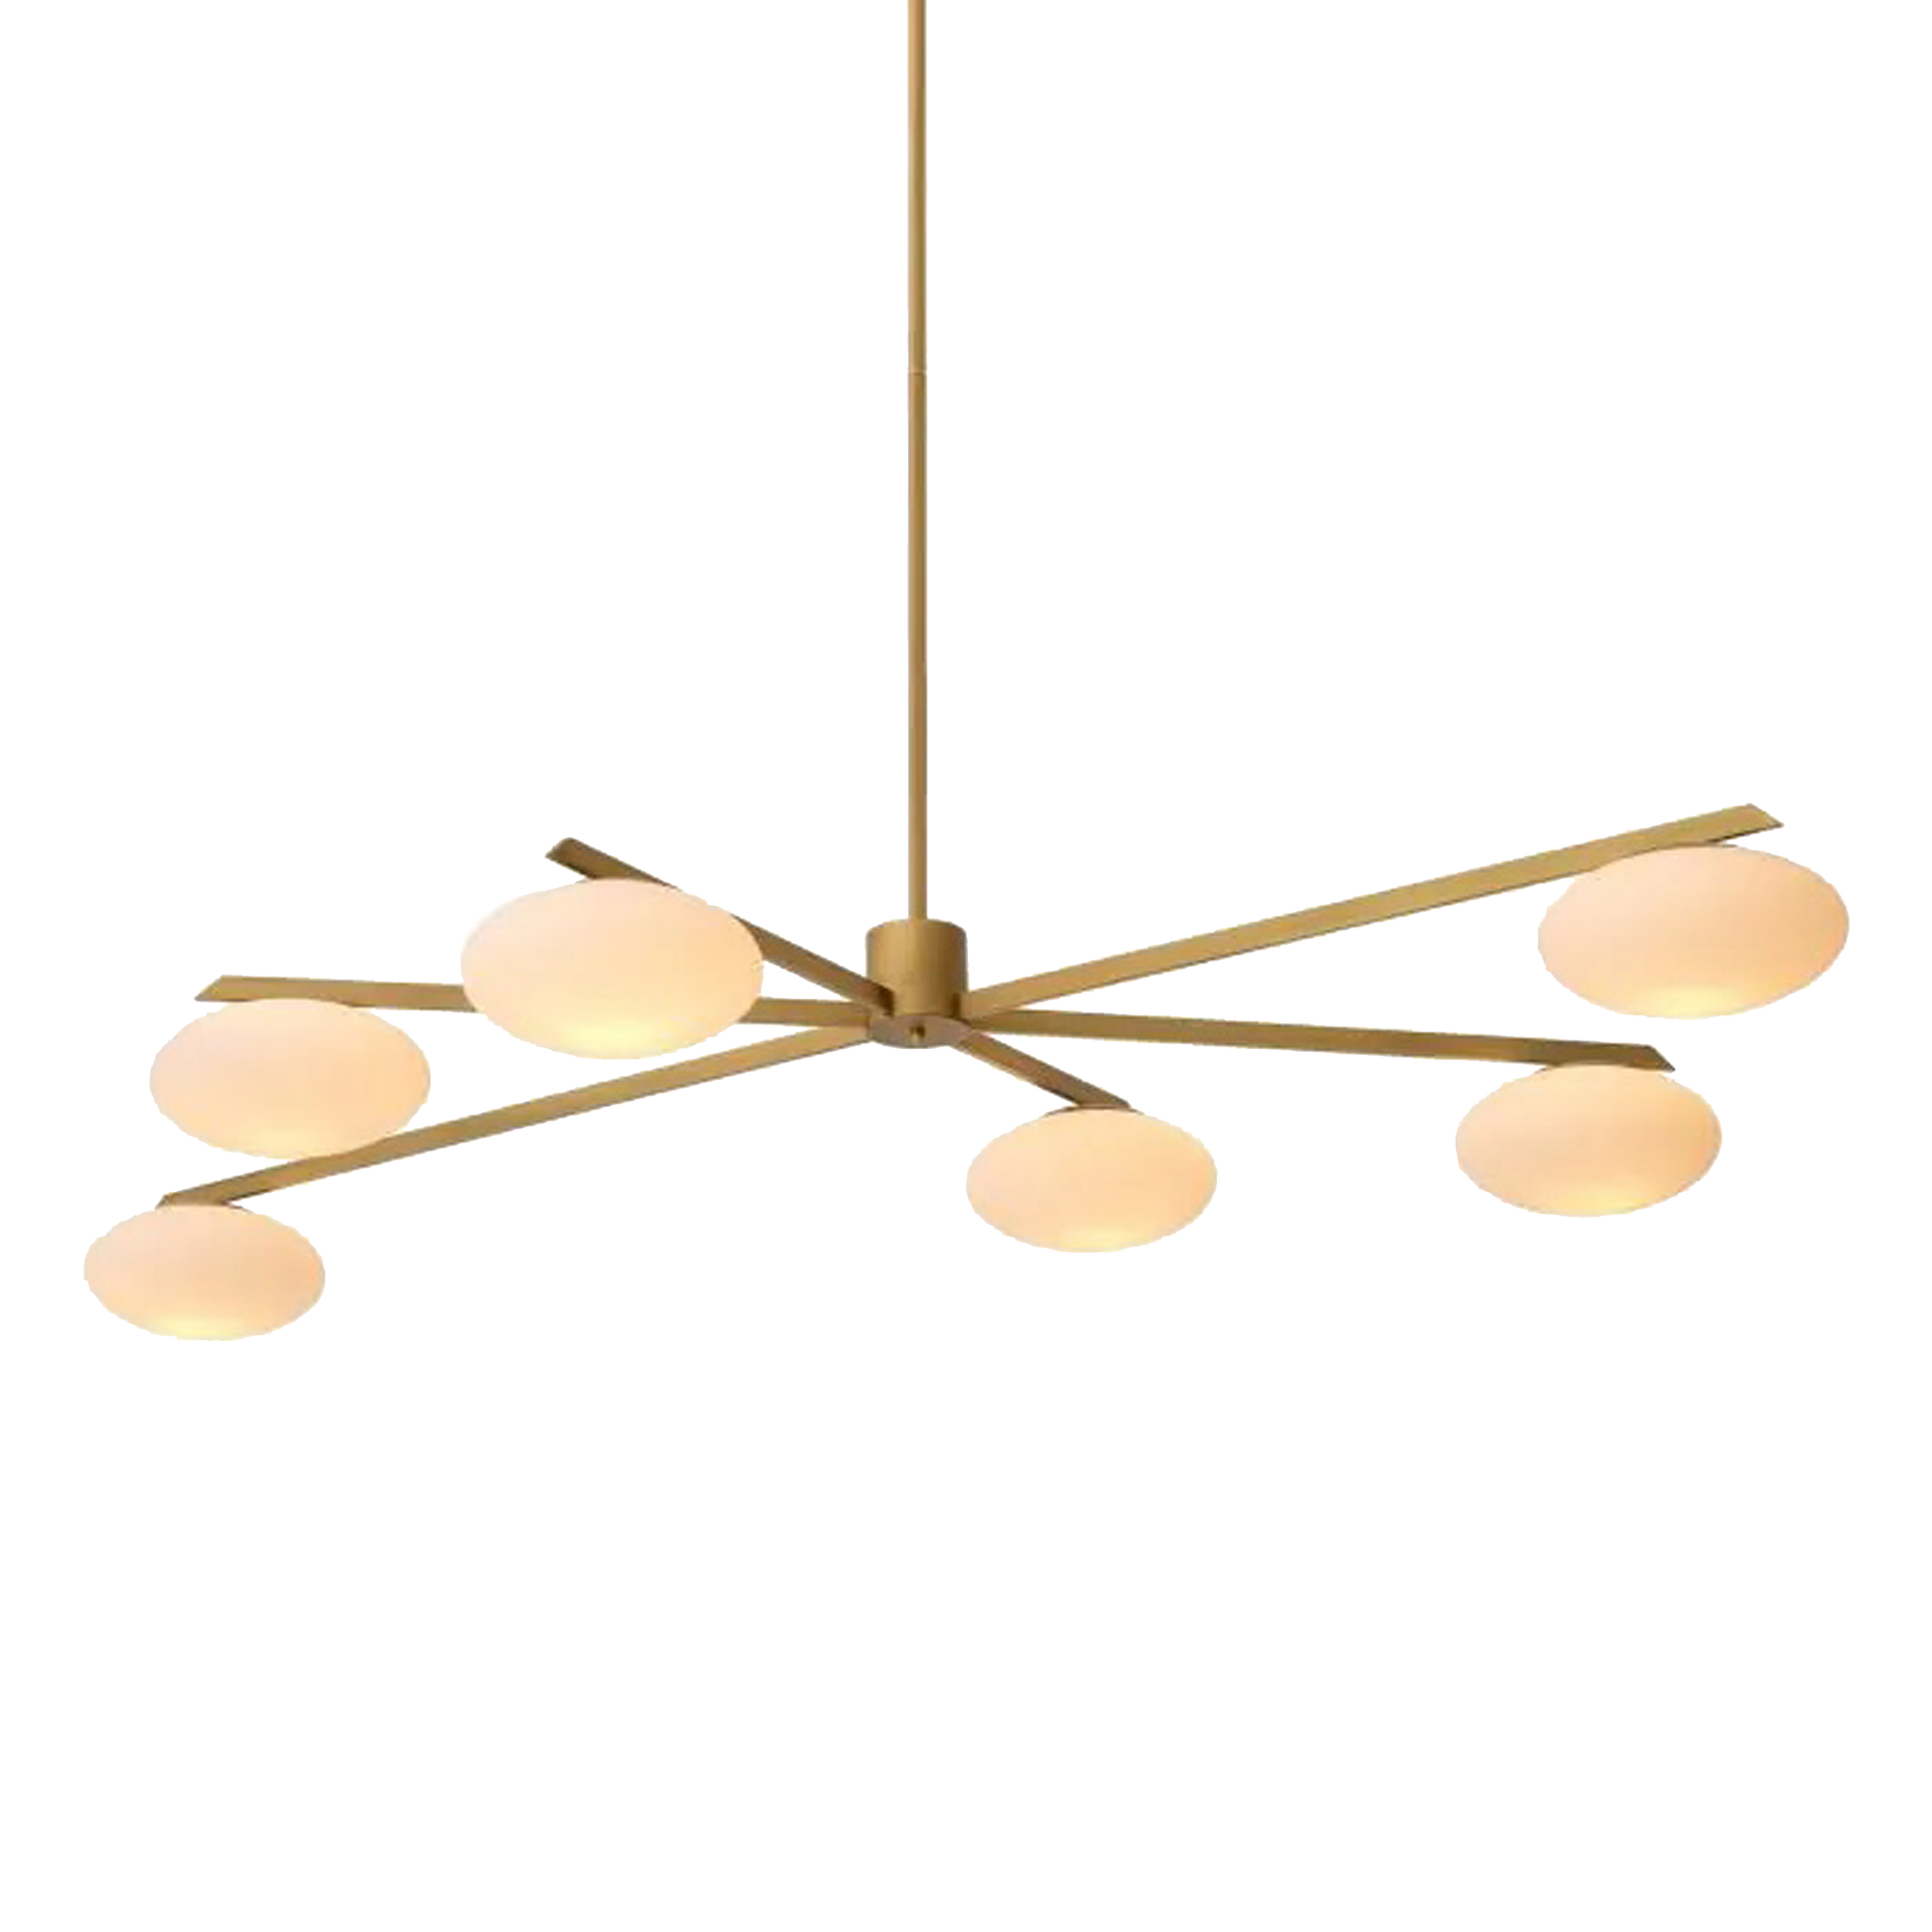 Add a dash of Mid-Century Modern style to your home with the Evergreen Chandelier.